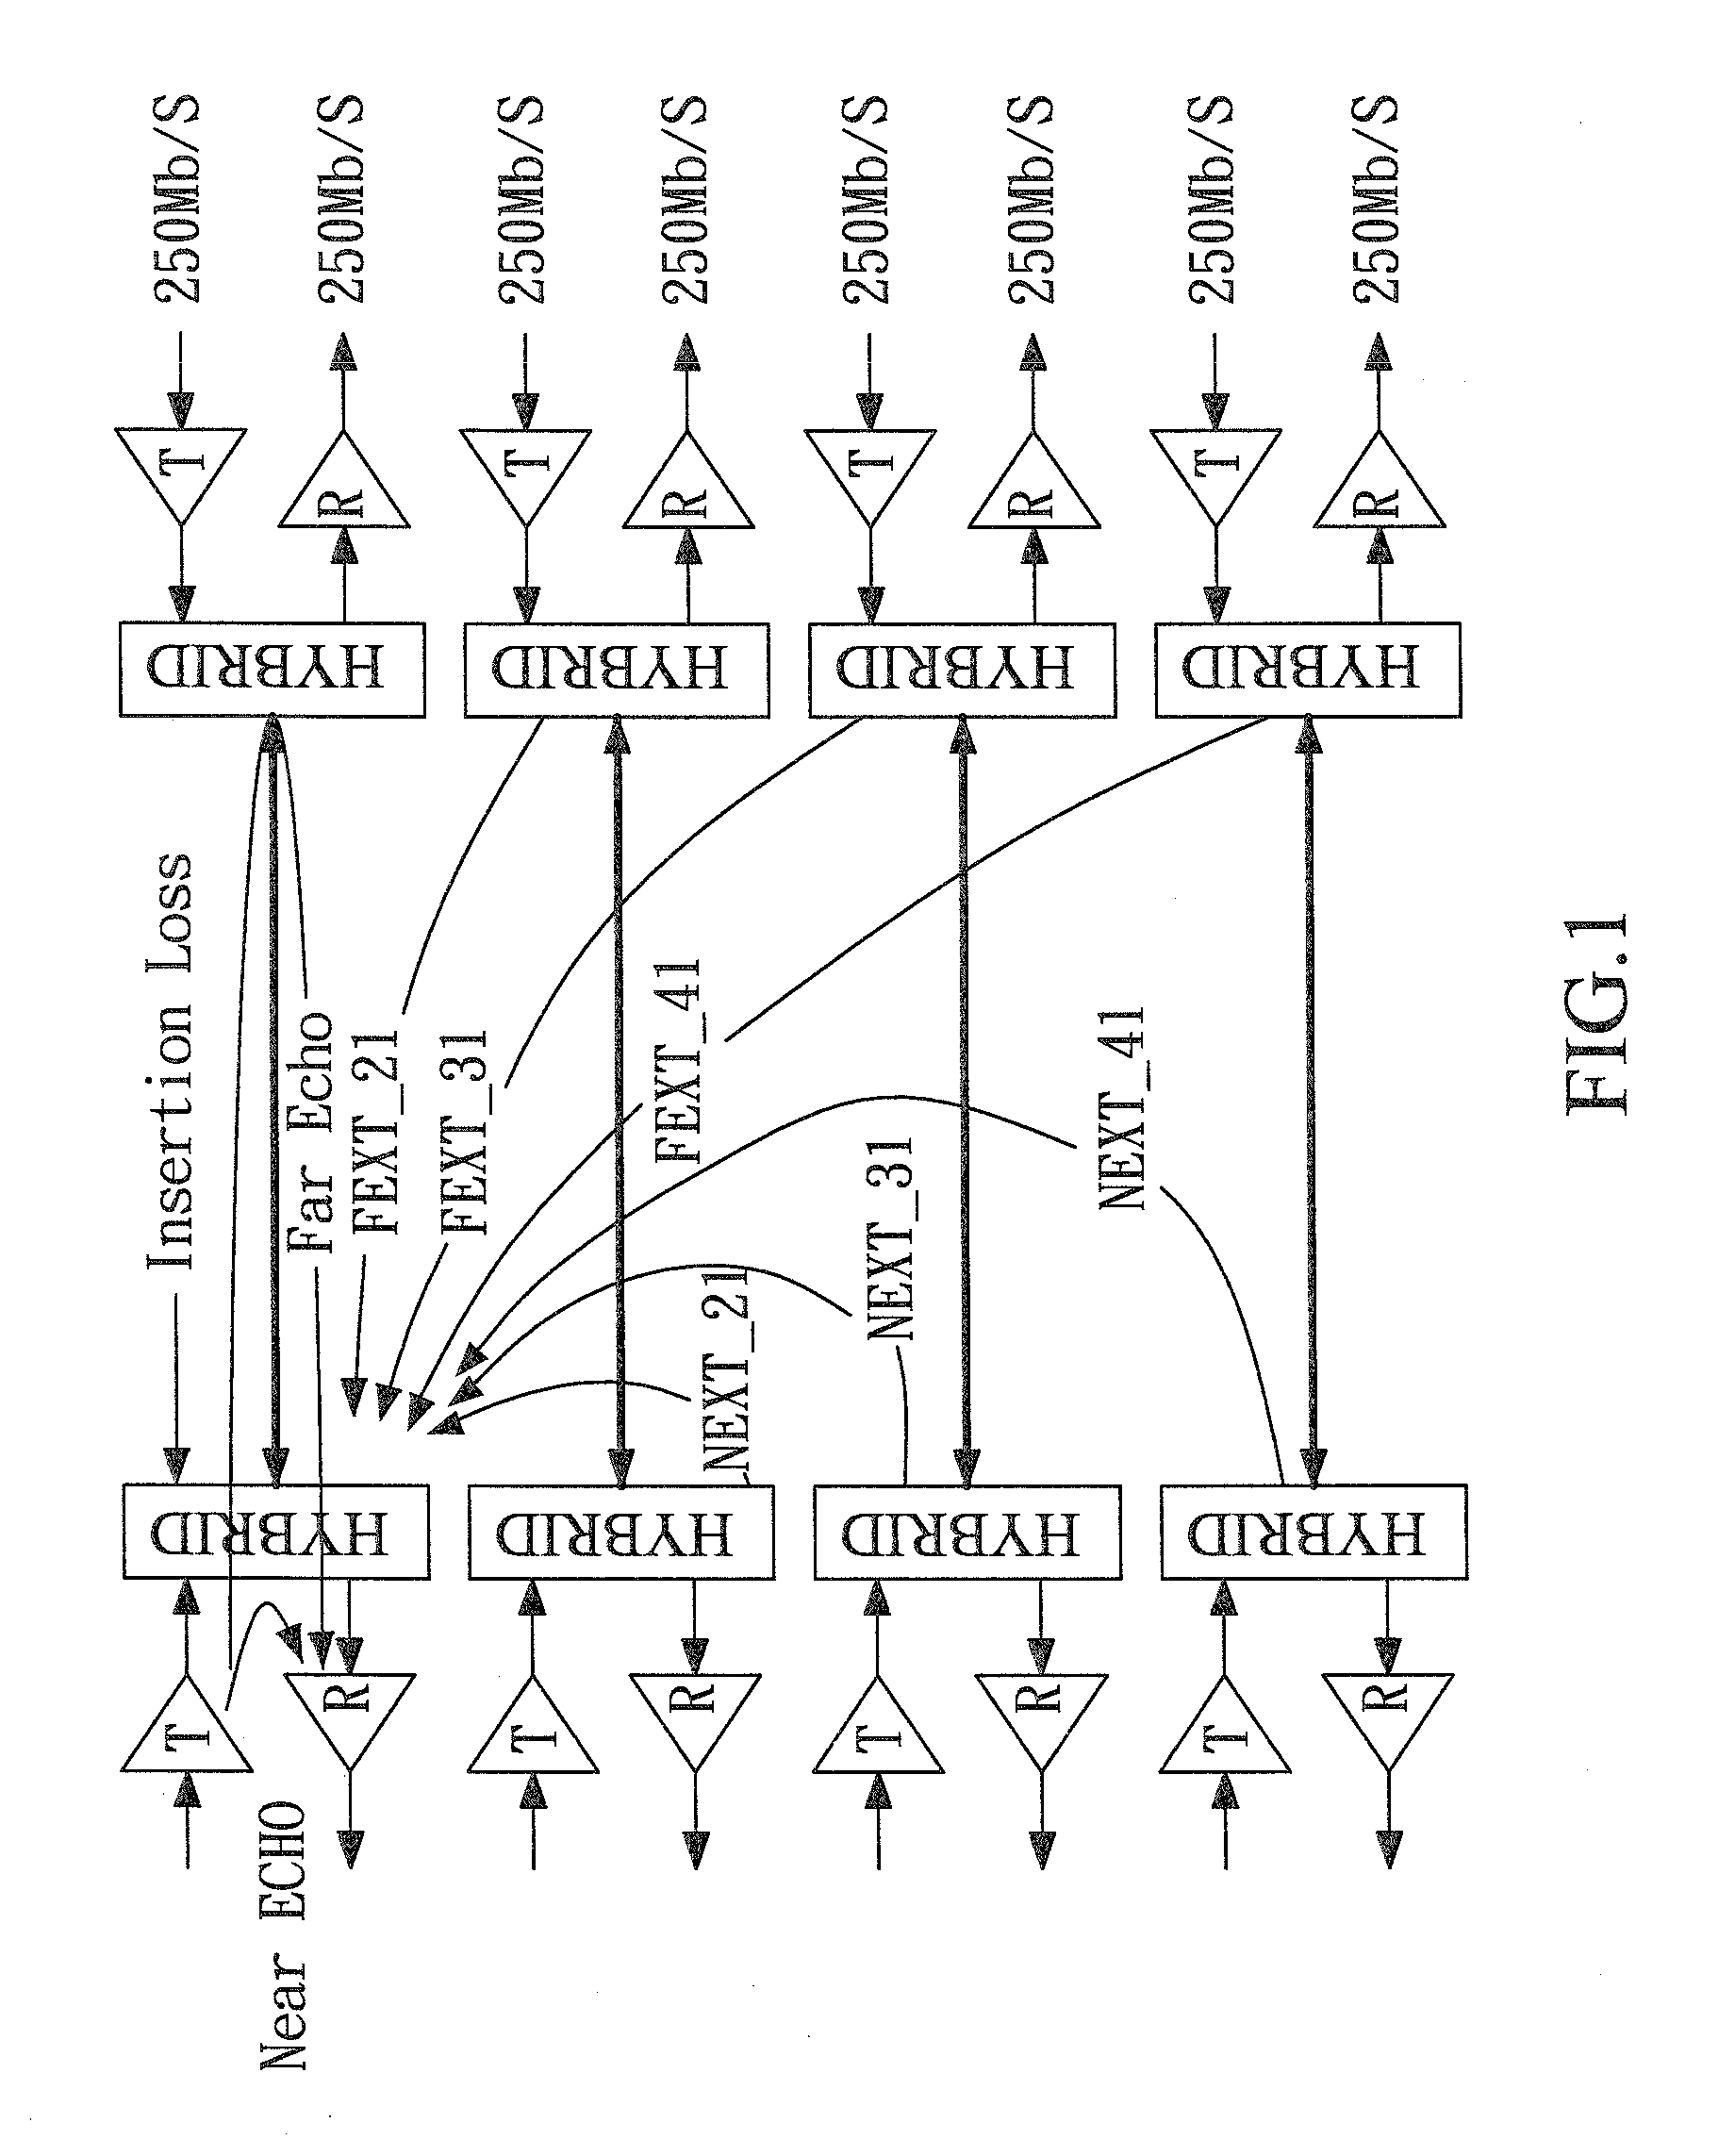 Joint decision feedback equalizer and trellis decoder